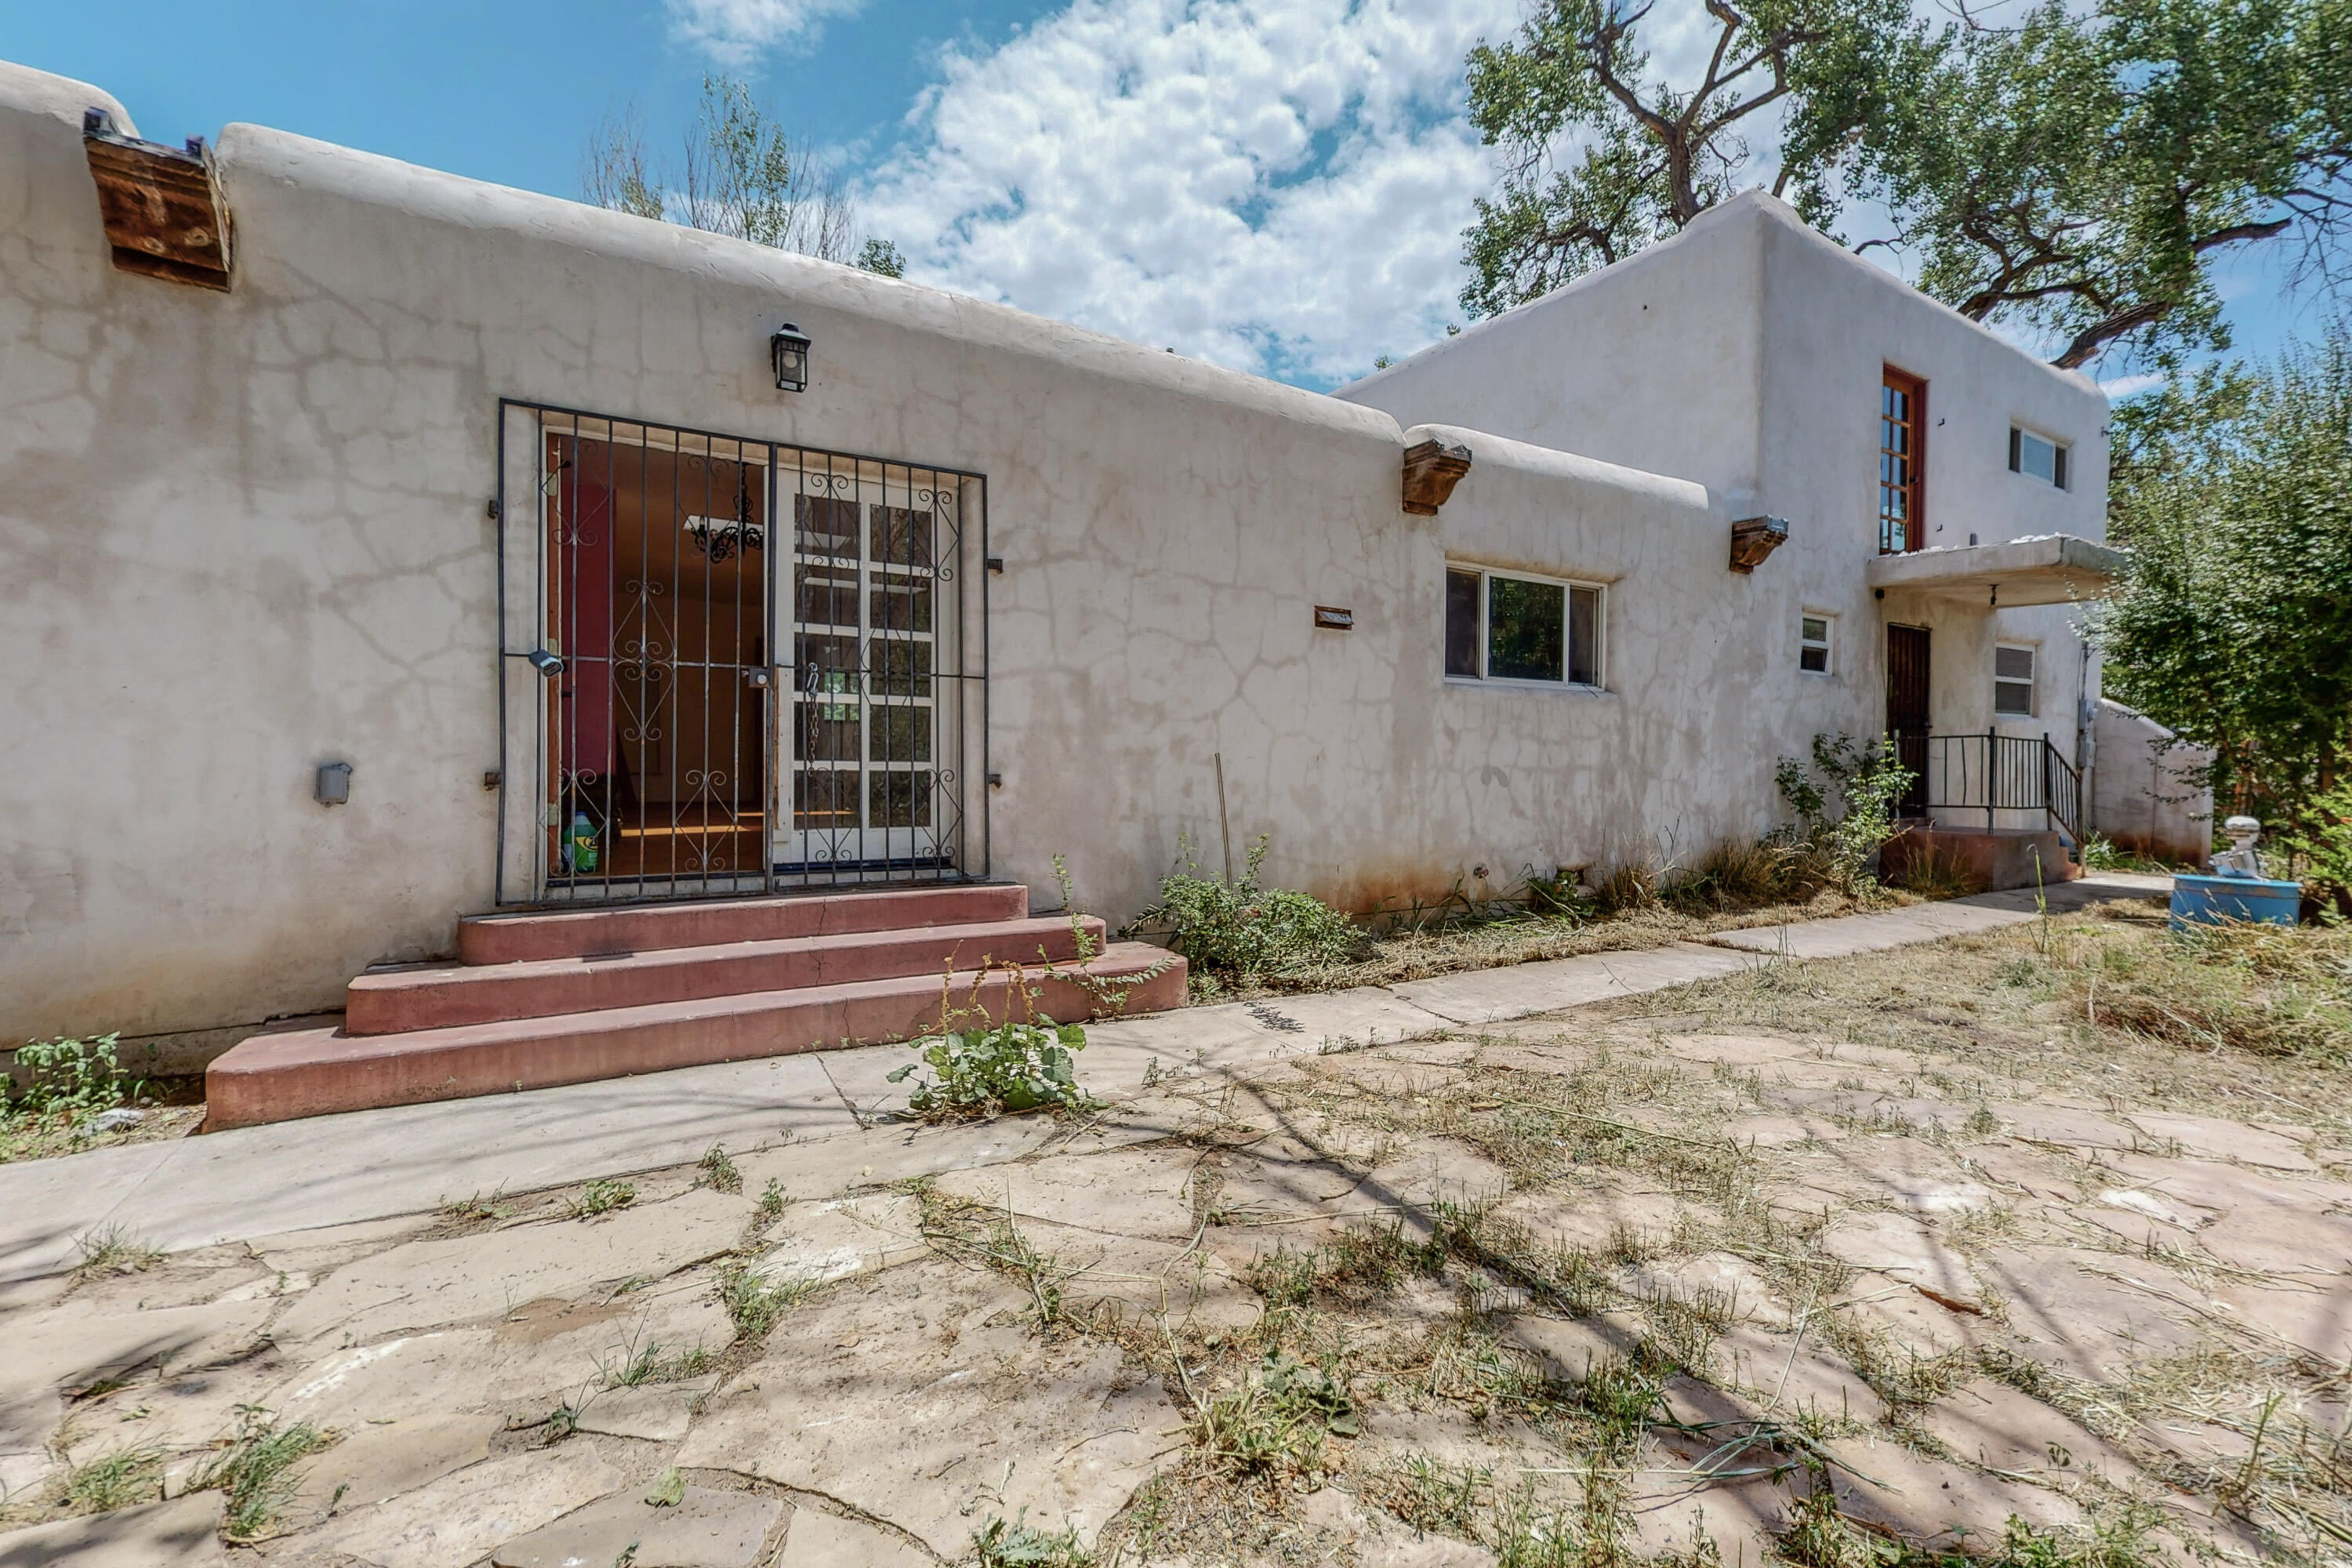 This is your opportunity to own a New Mexico True ranchito! The adobe walls of this 5 BR, 3 3/4 BA home, are heated by two, wood burning, kiva fireplaces. The home has space off of the garage that can be utilized as a workshop or office. The space has a separate entrance and has a sink, countertop space and a full bathroom. There is an adobe casita that contains 1 bedroom, a full bath, kitchen and living room. The property is situated on 1.34 acres and comes with Pre 1907 water rights! There's more! There's a barn, chicken coop and small orchard containing apple, pear, cherry and pomegranate trees.  Peacocks regularly frequent the property. The roof on the main house and guest house were replaced in 2014. If interested in owning your own piece of a truly New Mexican home, look no further!